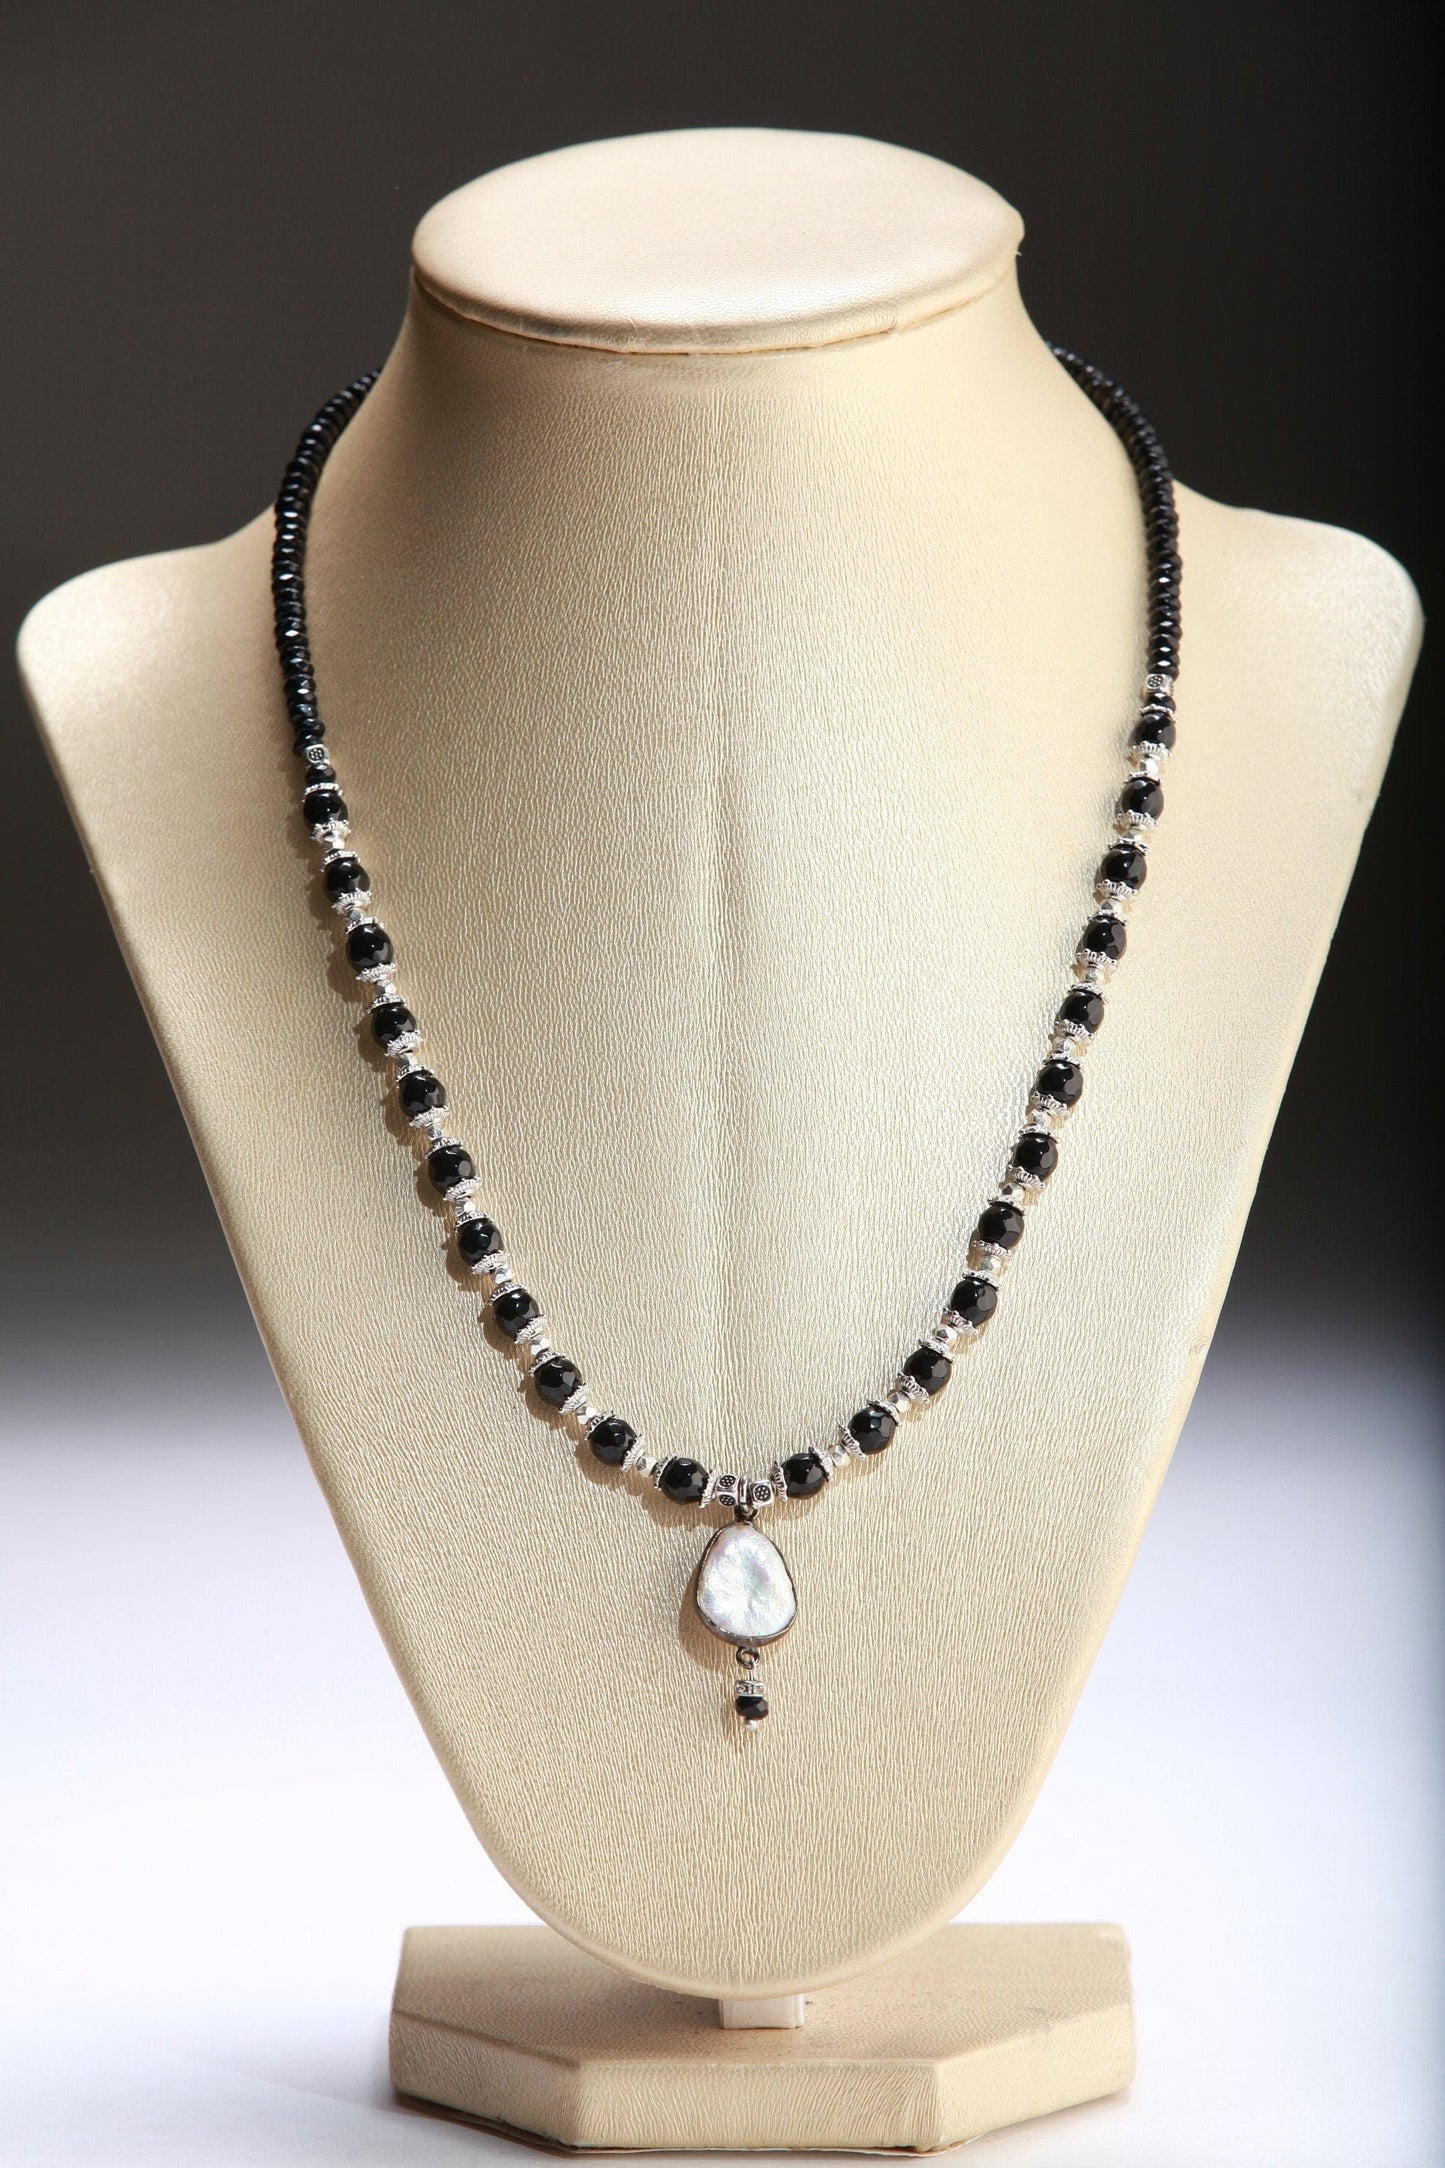 Pearl Necklace Black Onyx Faceted Gemstone Round and Roundel with 13x15mm Freshwater Pearl Centerpiece Teardrop Focal Statement Necklace